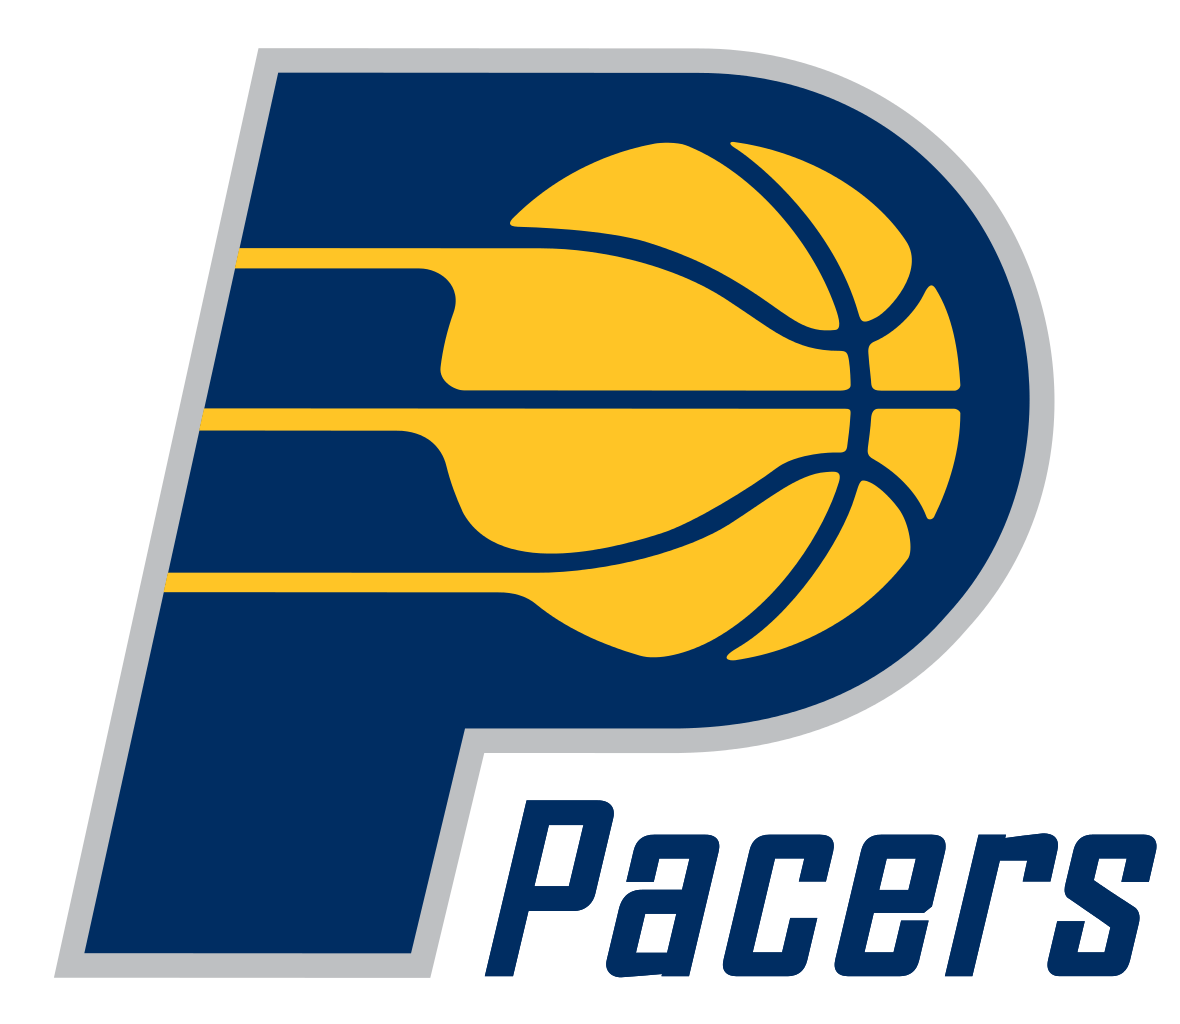 Pacers Logo - Indiana Pacers Logo transparent PNG